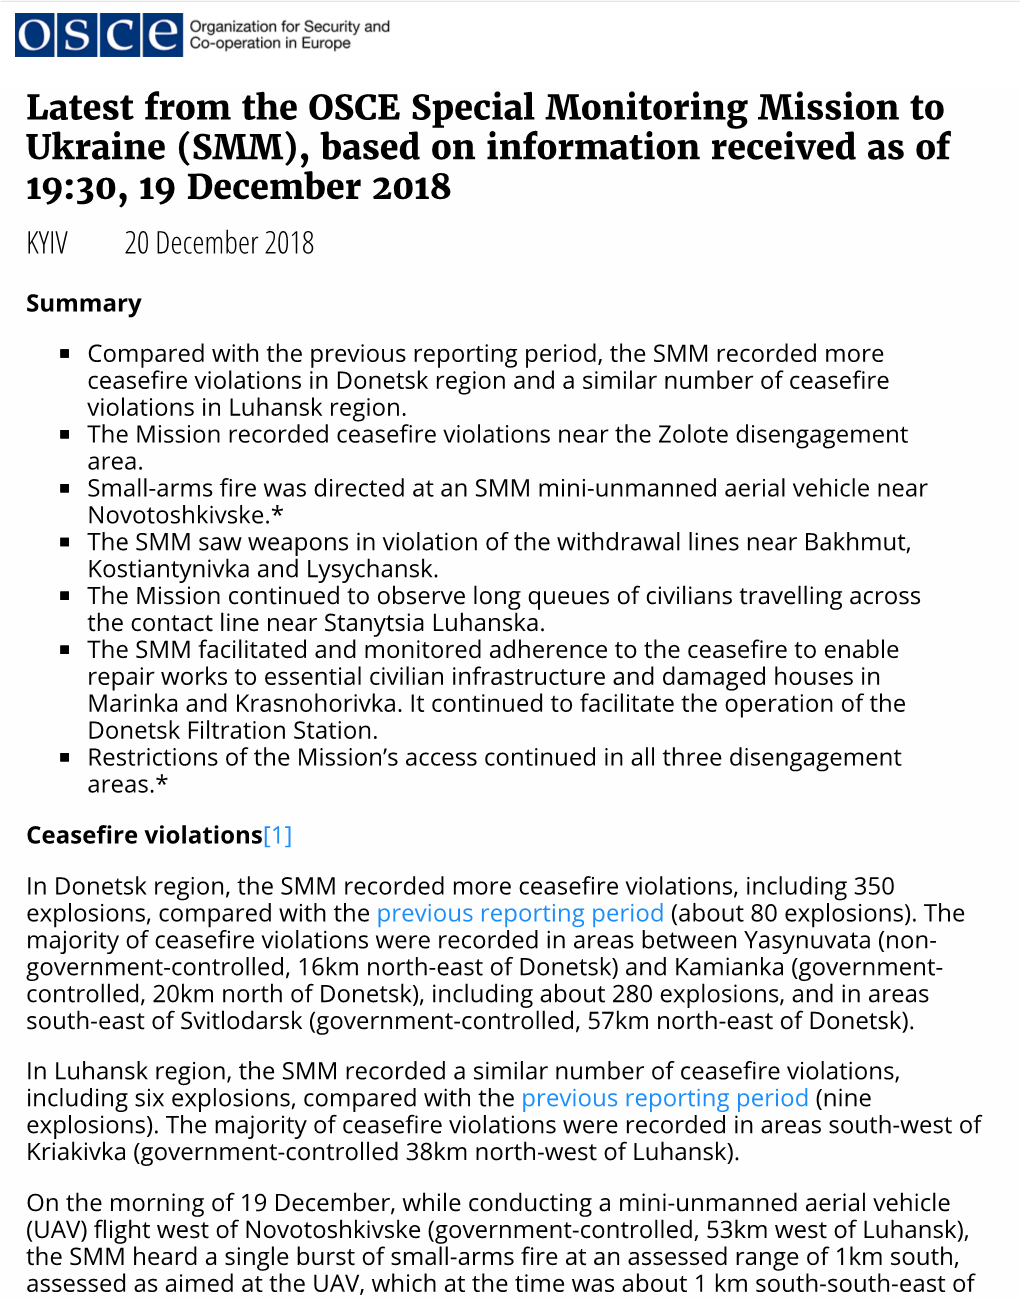 Latest from the OSCE Special Monitoring Mission to Ukraine (SMM), Based on Information Received As of 19:30, 19 December 2018 KYIV 20 December 2018